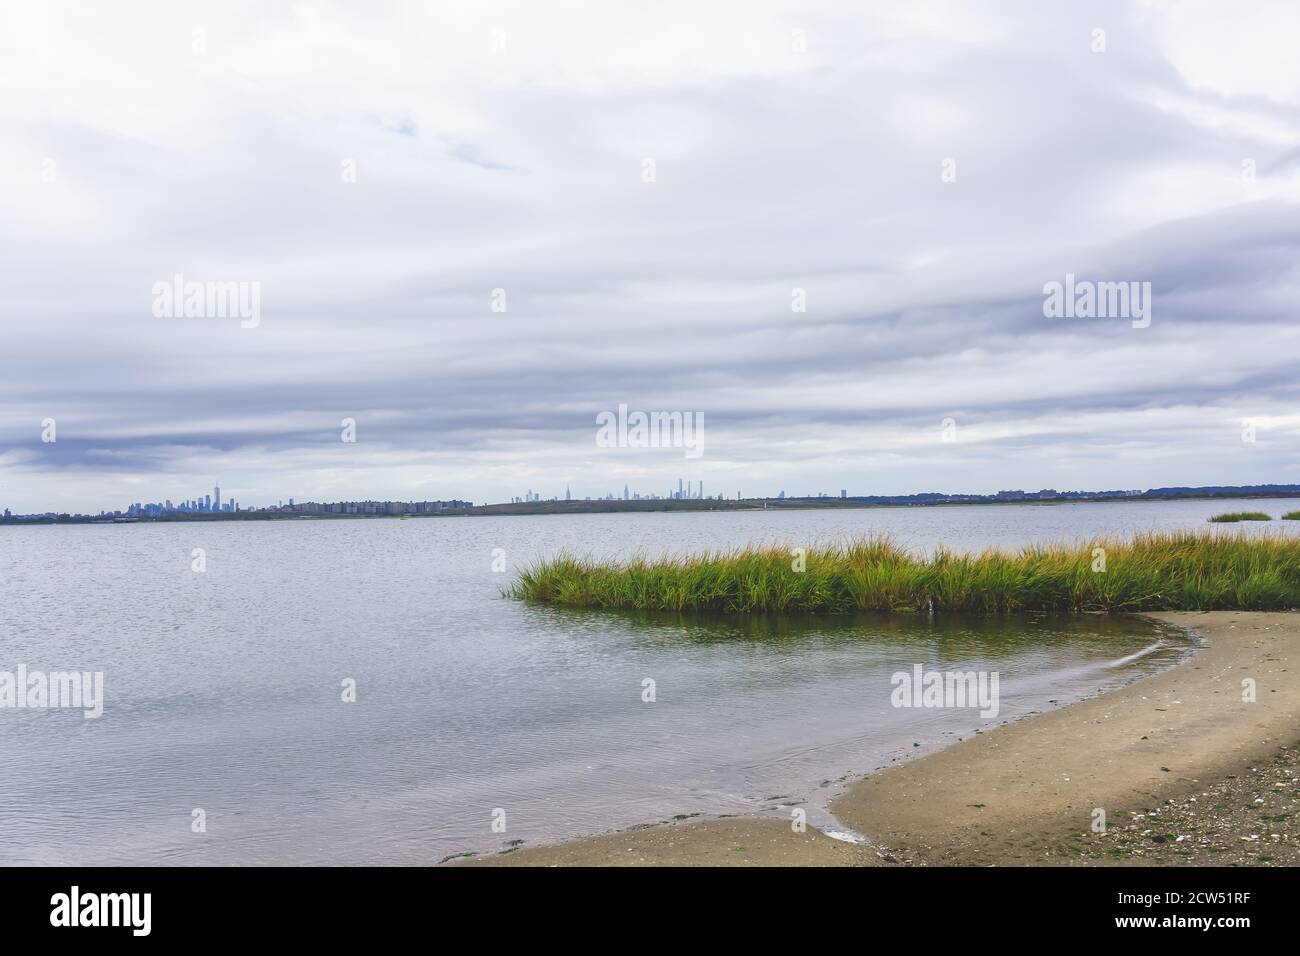 bay with sand and grass at Jamaica bay wildlife refuge with nyc background Stock Photo